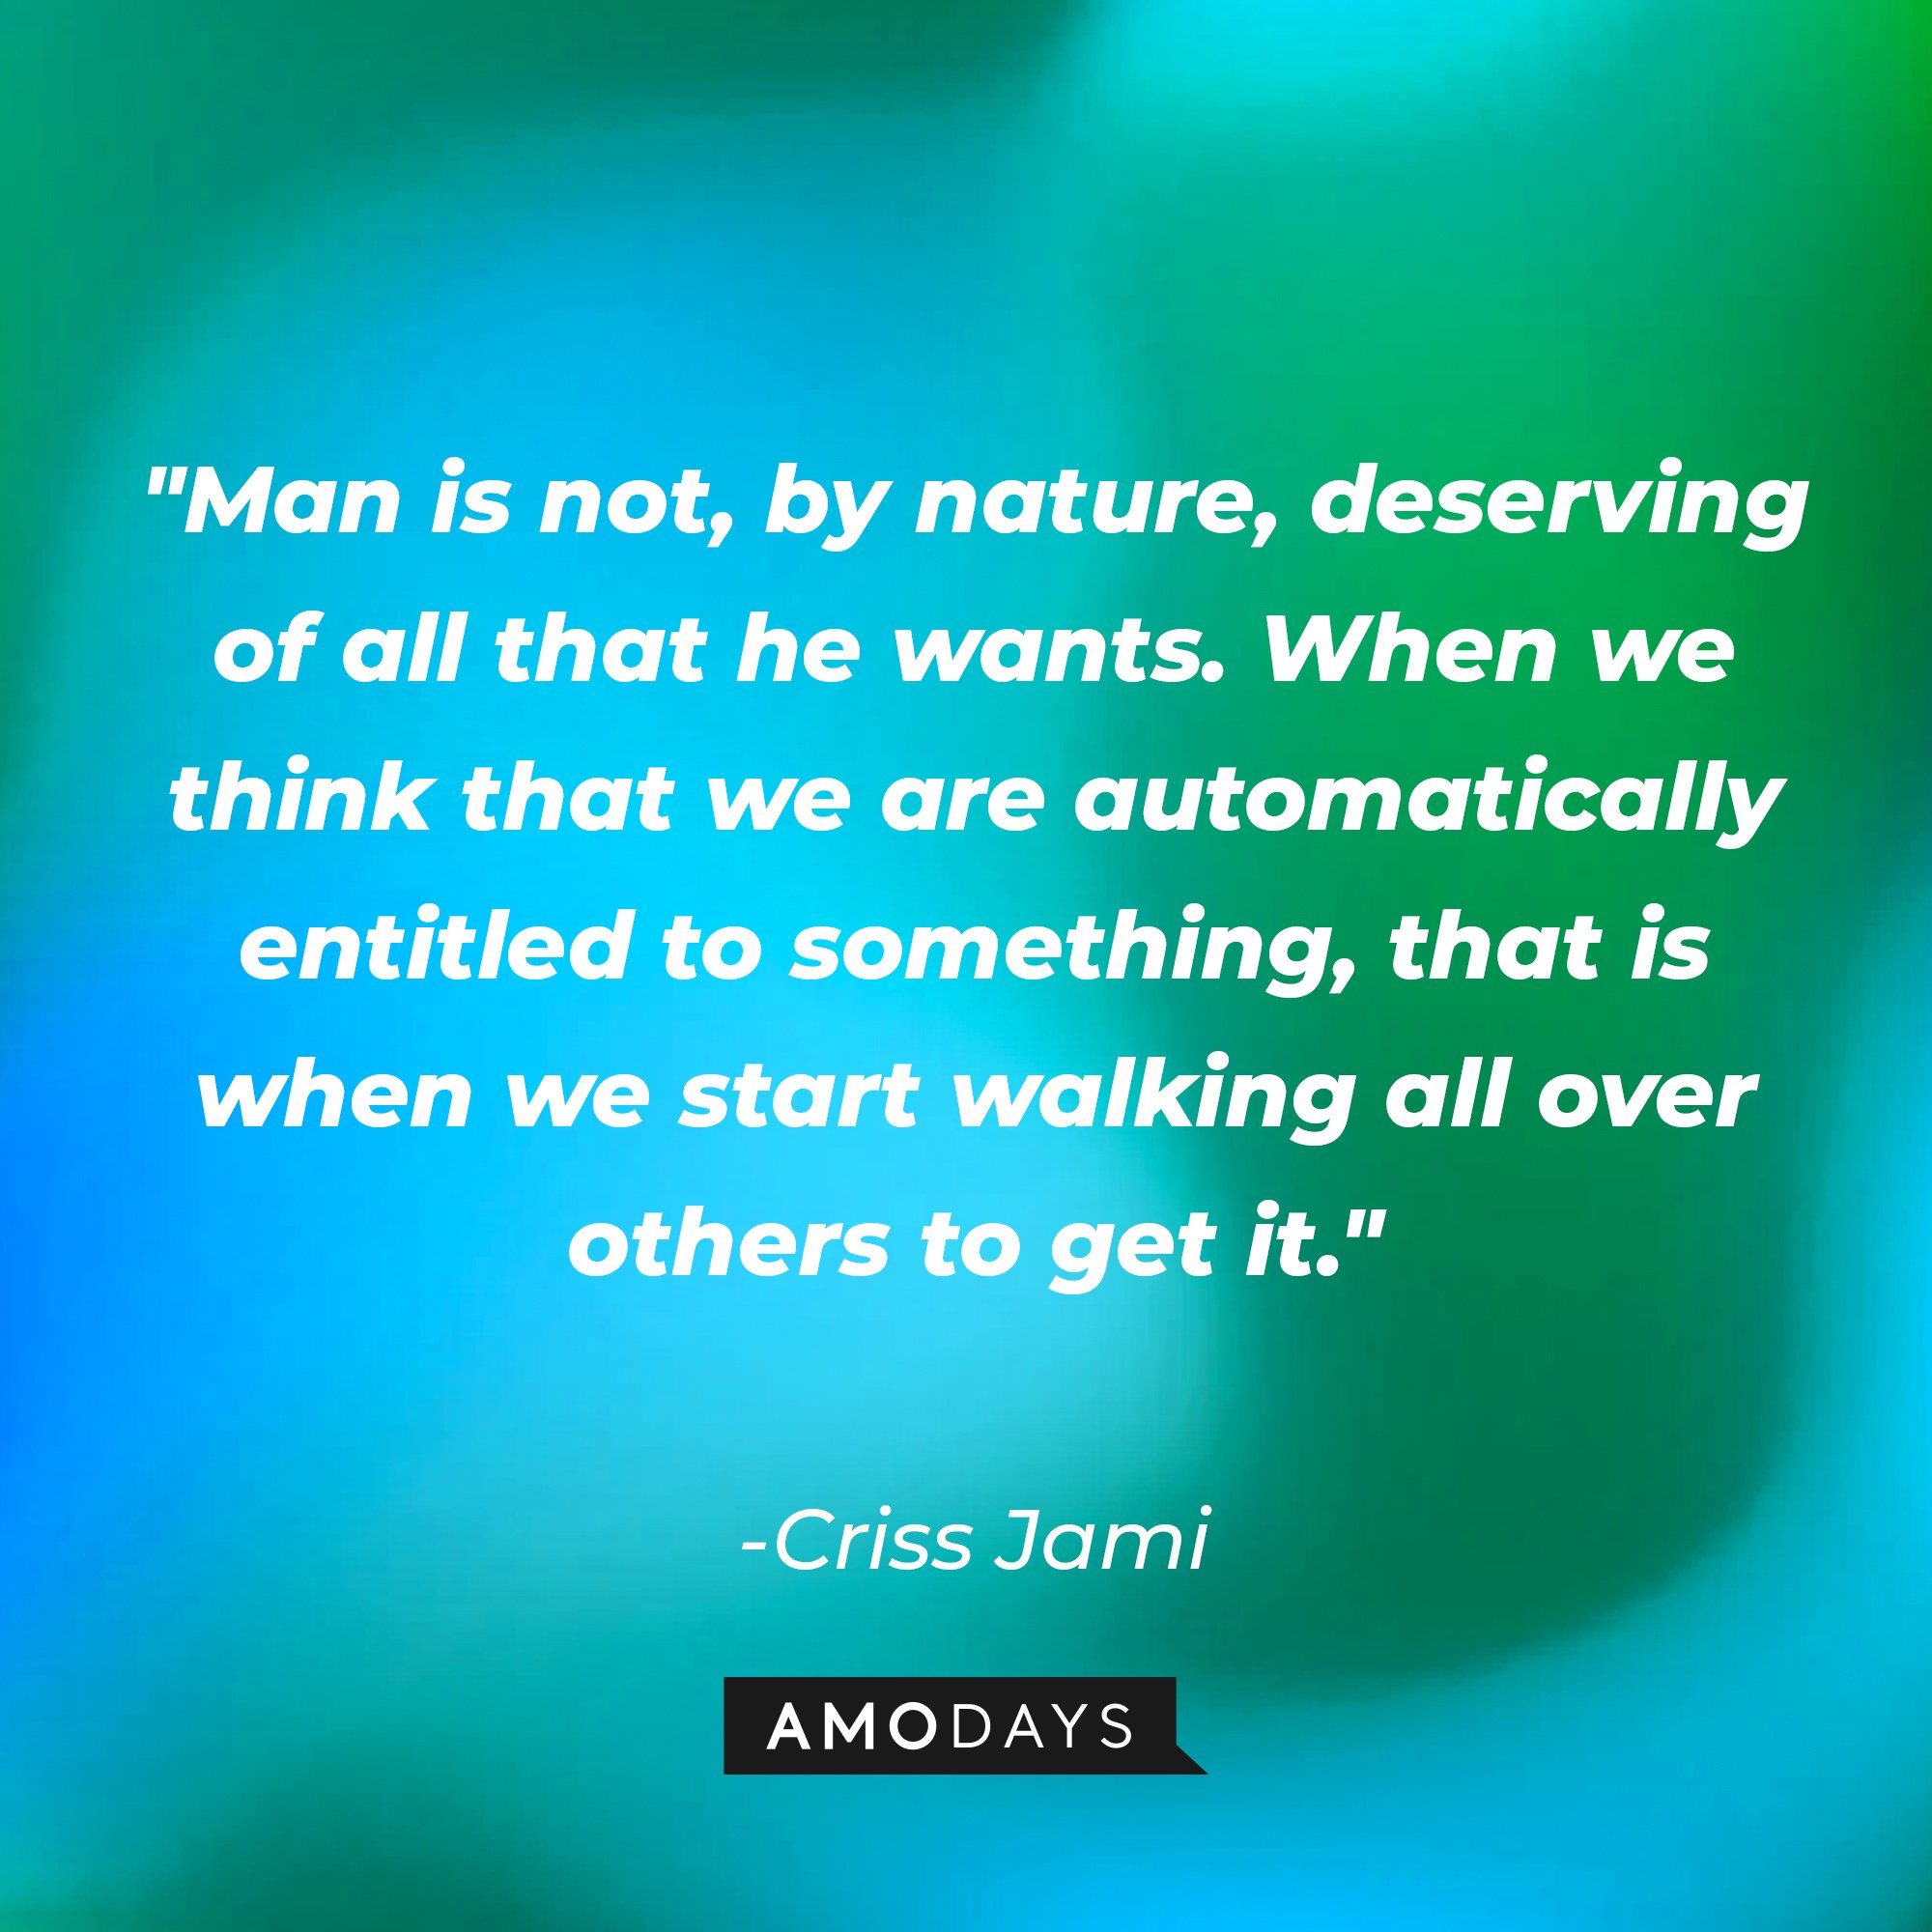 Criss Jami’s quote: "Man is not, by nature, deserving of all that he wants. When we think that we are automatically entitled to something, that is when we start walking all over others to get it." | Image: AmoDays